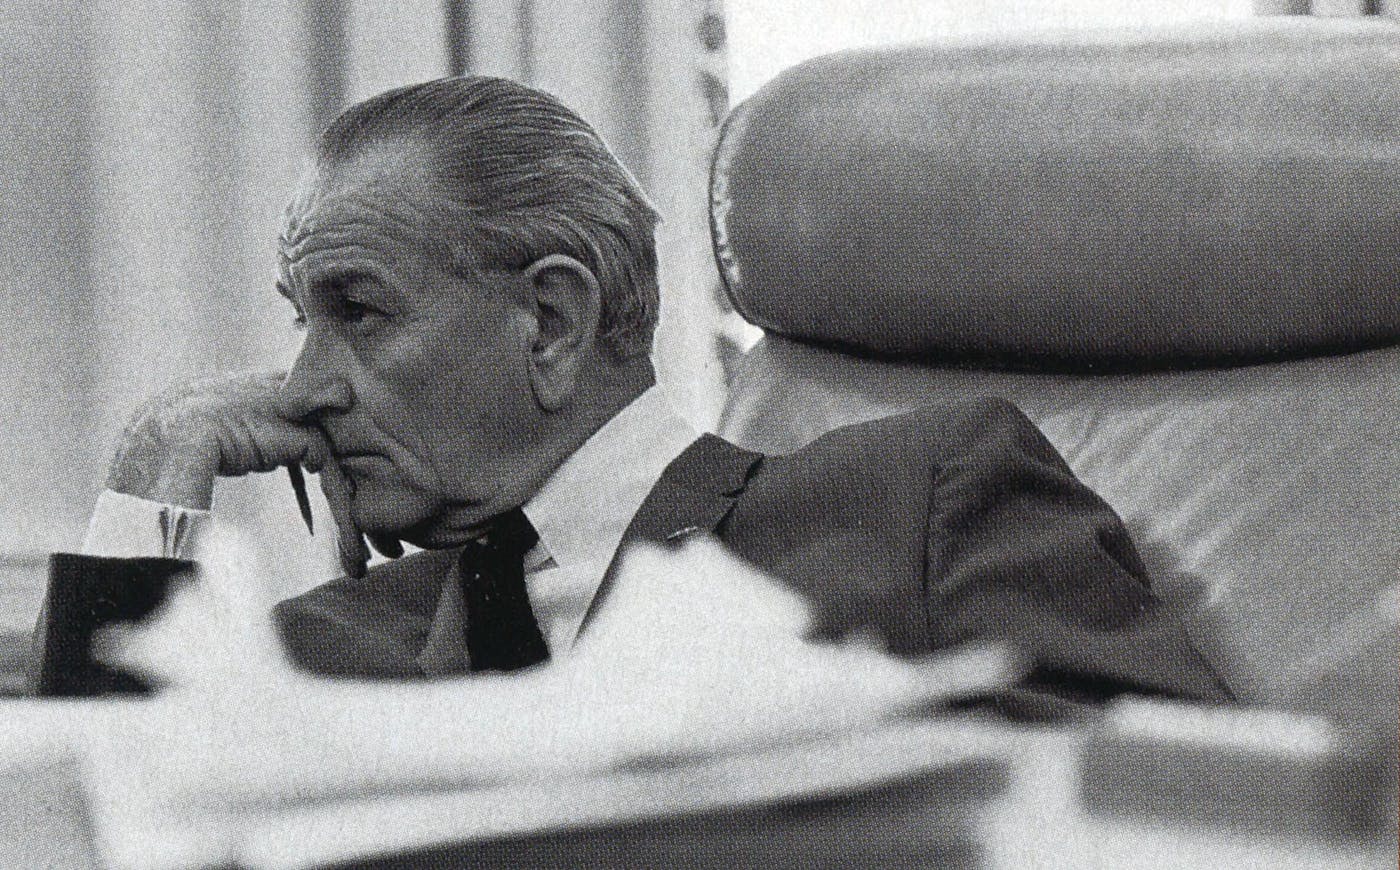 Lyndon Johnson on the Record – Texas Monthly